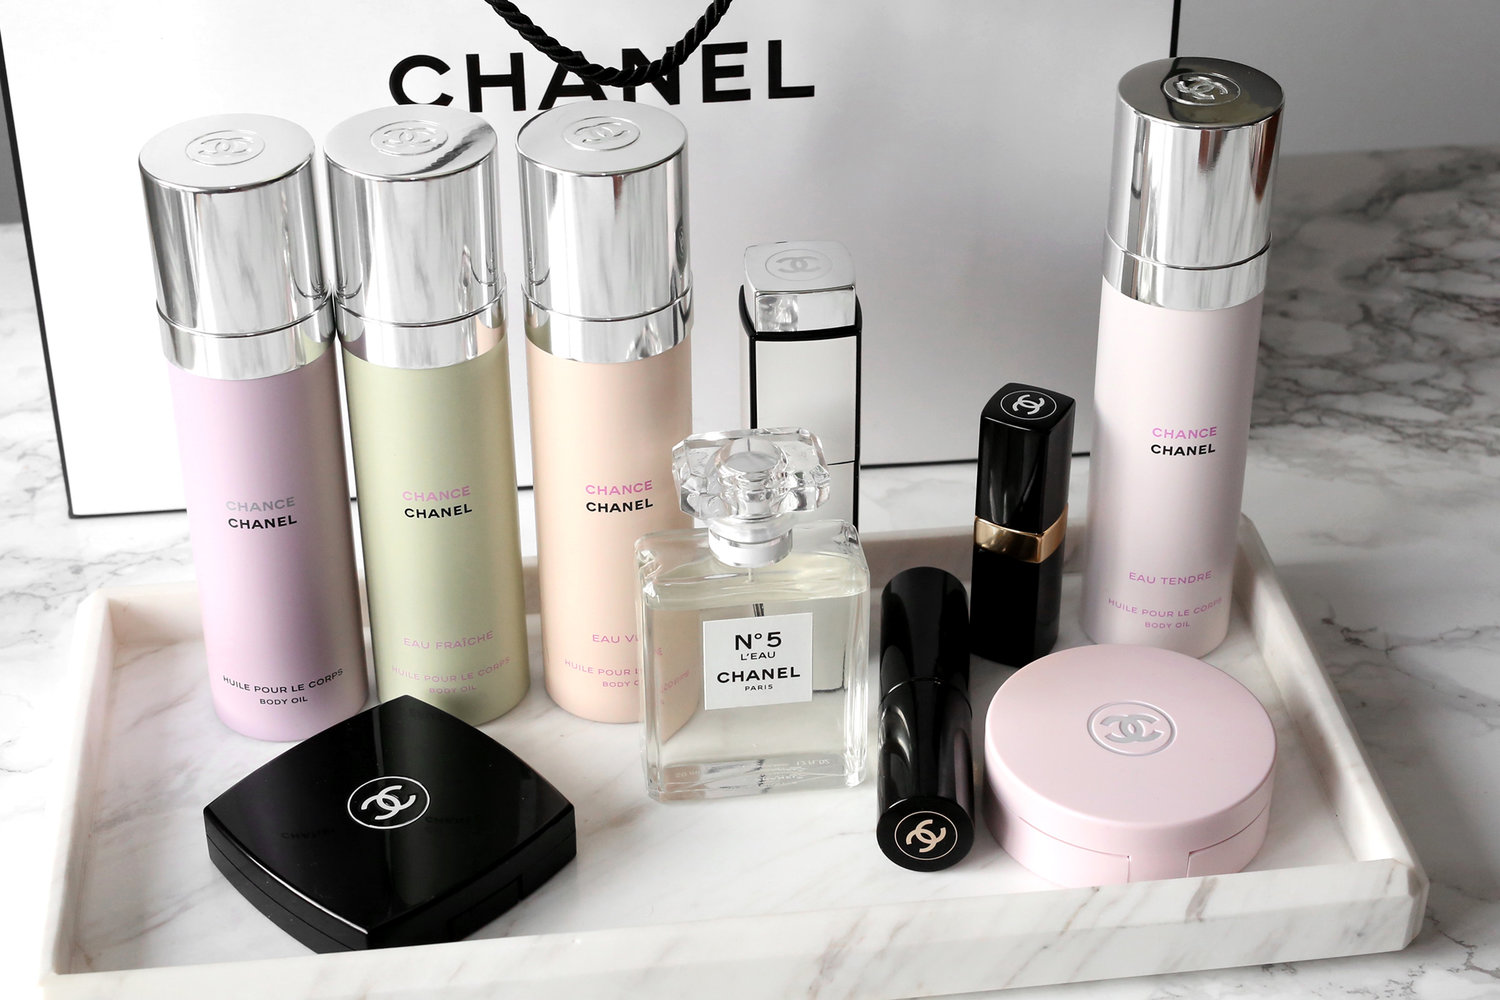 What perfume smells like Chanel Chance: A Quick Guide